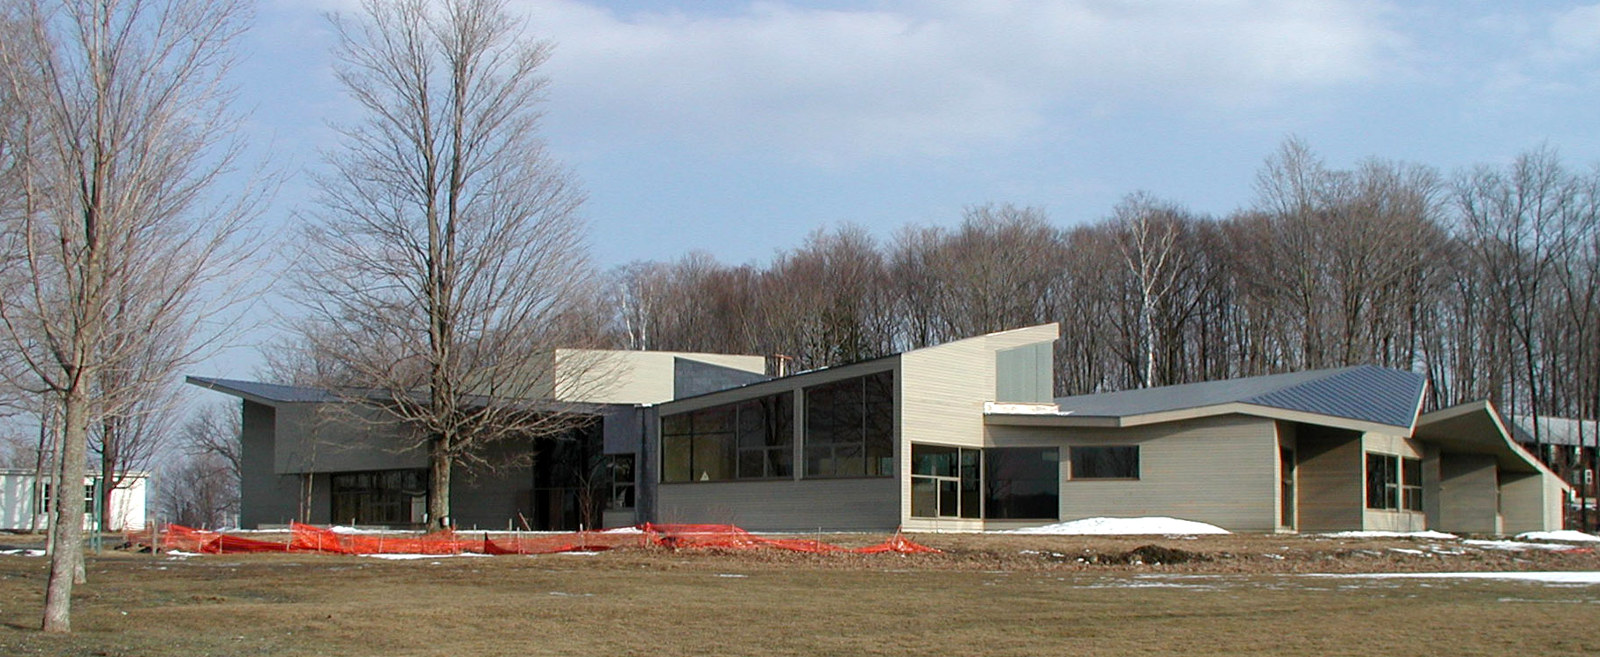 Exterior view of the Currier Performing Arts Center at The Putney School, Vt.